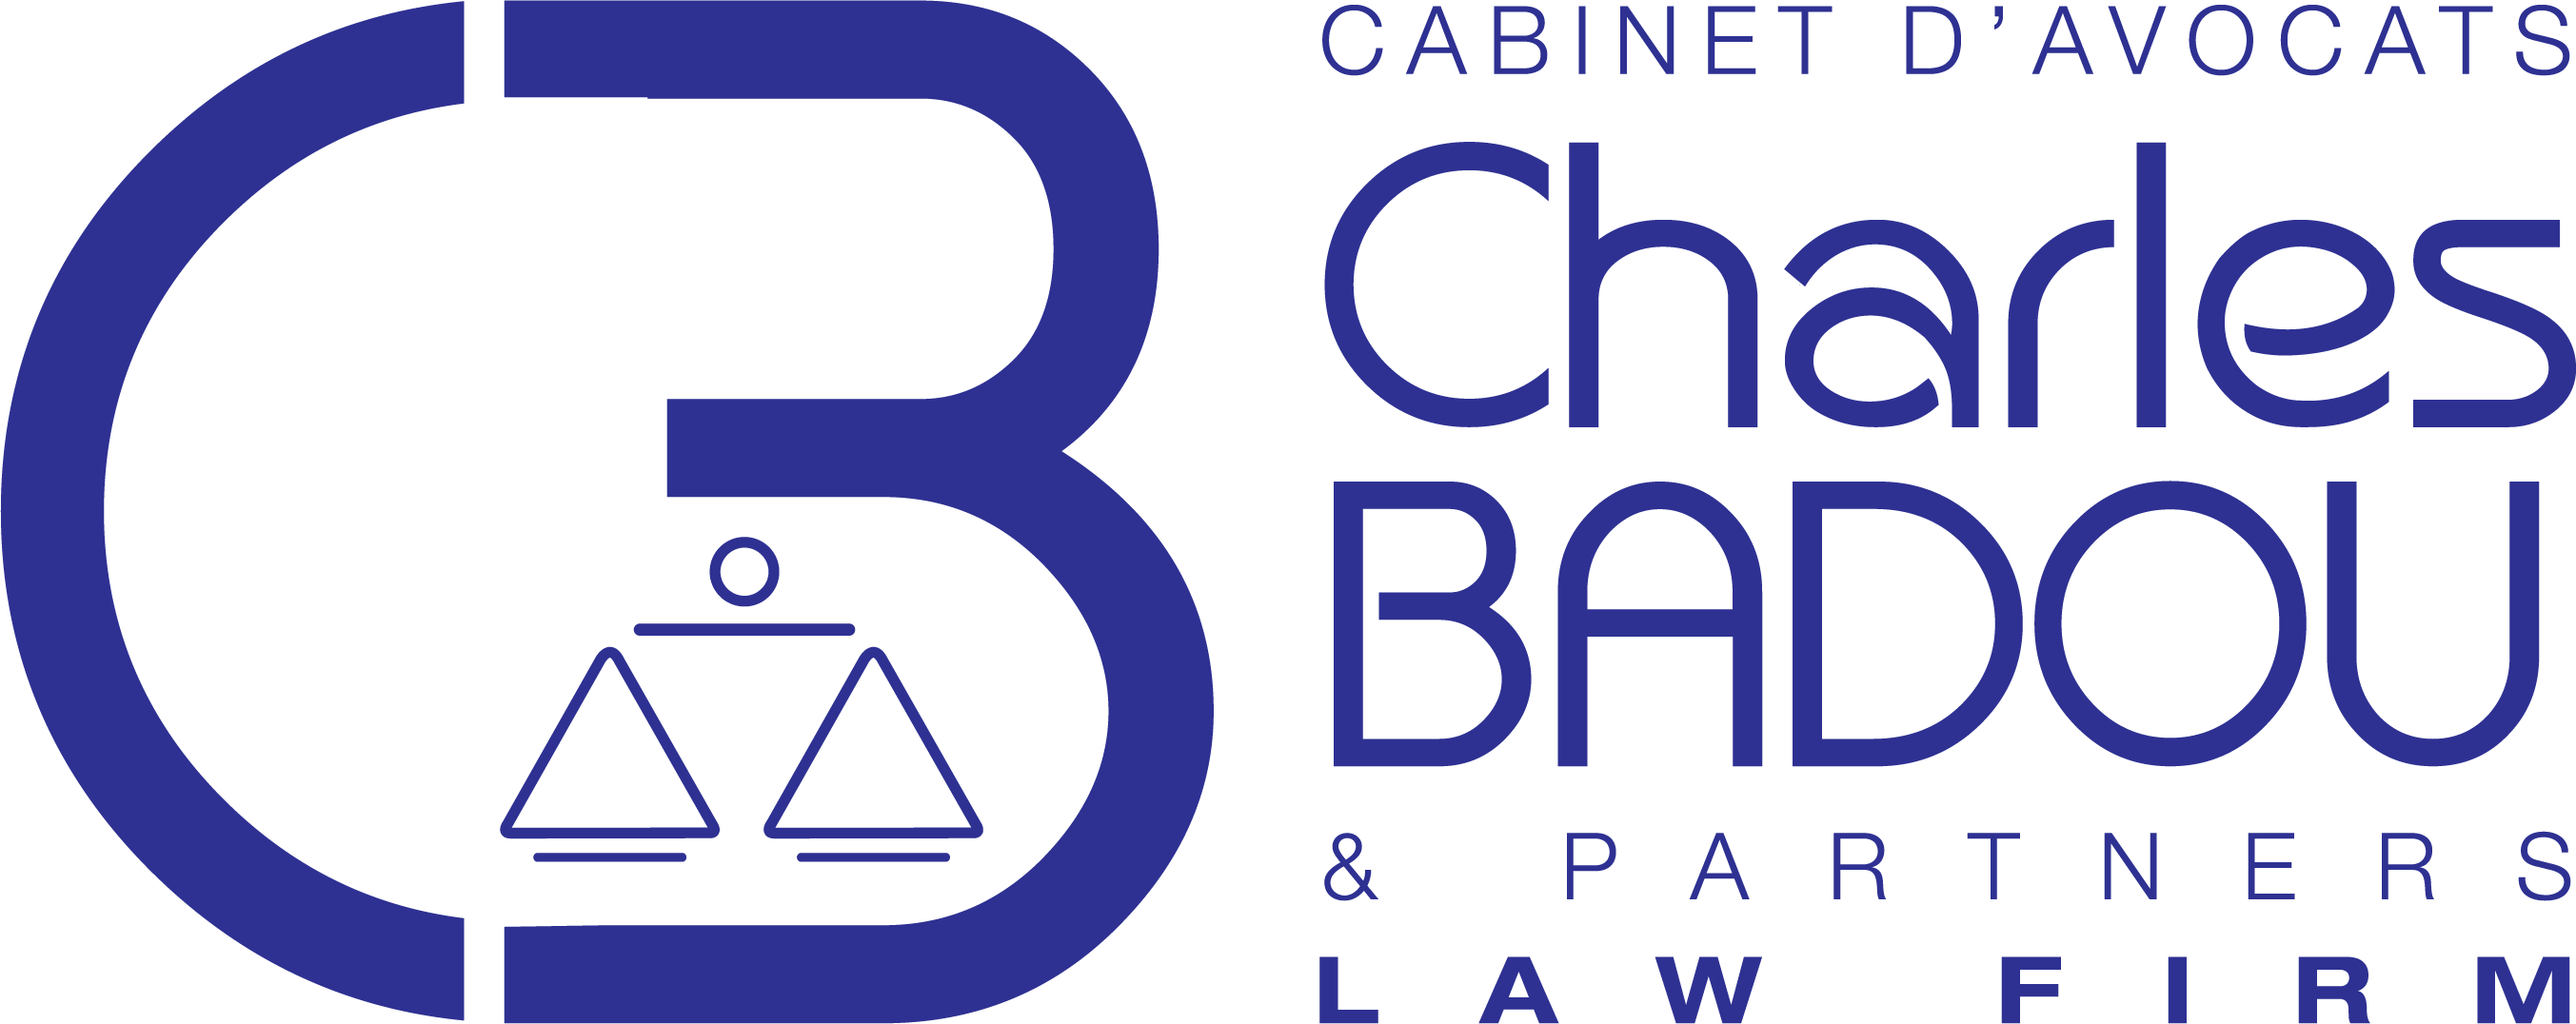 CABINET D'AVOCATS CHARLES BADOU & PARTNERS